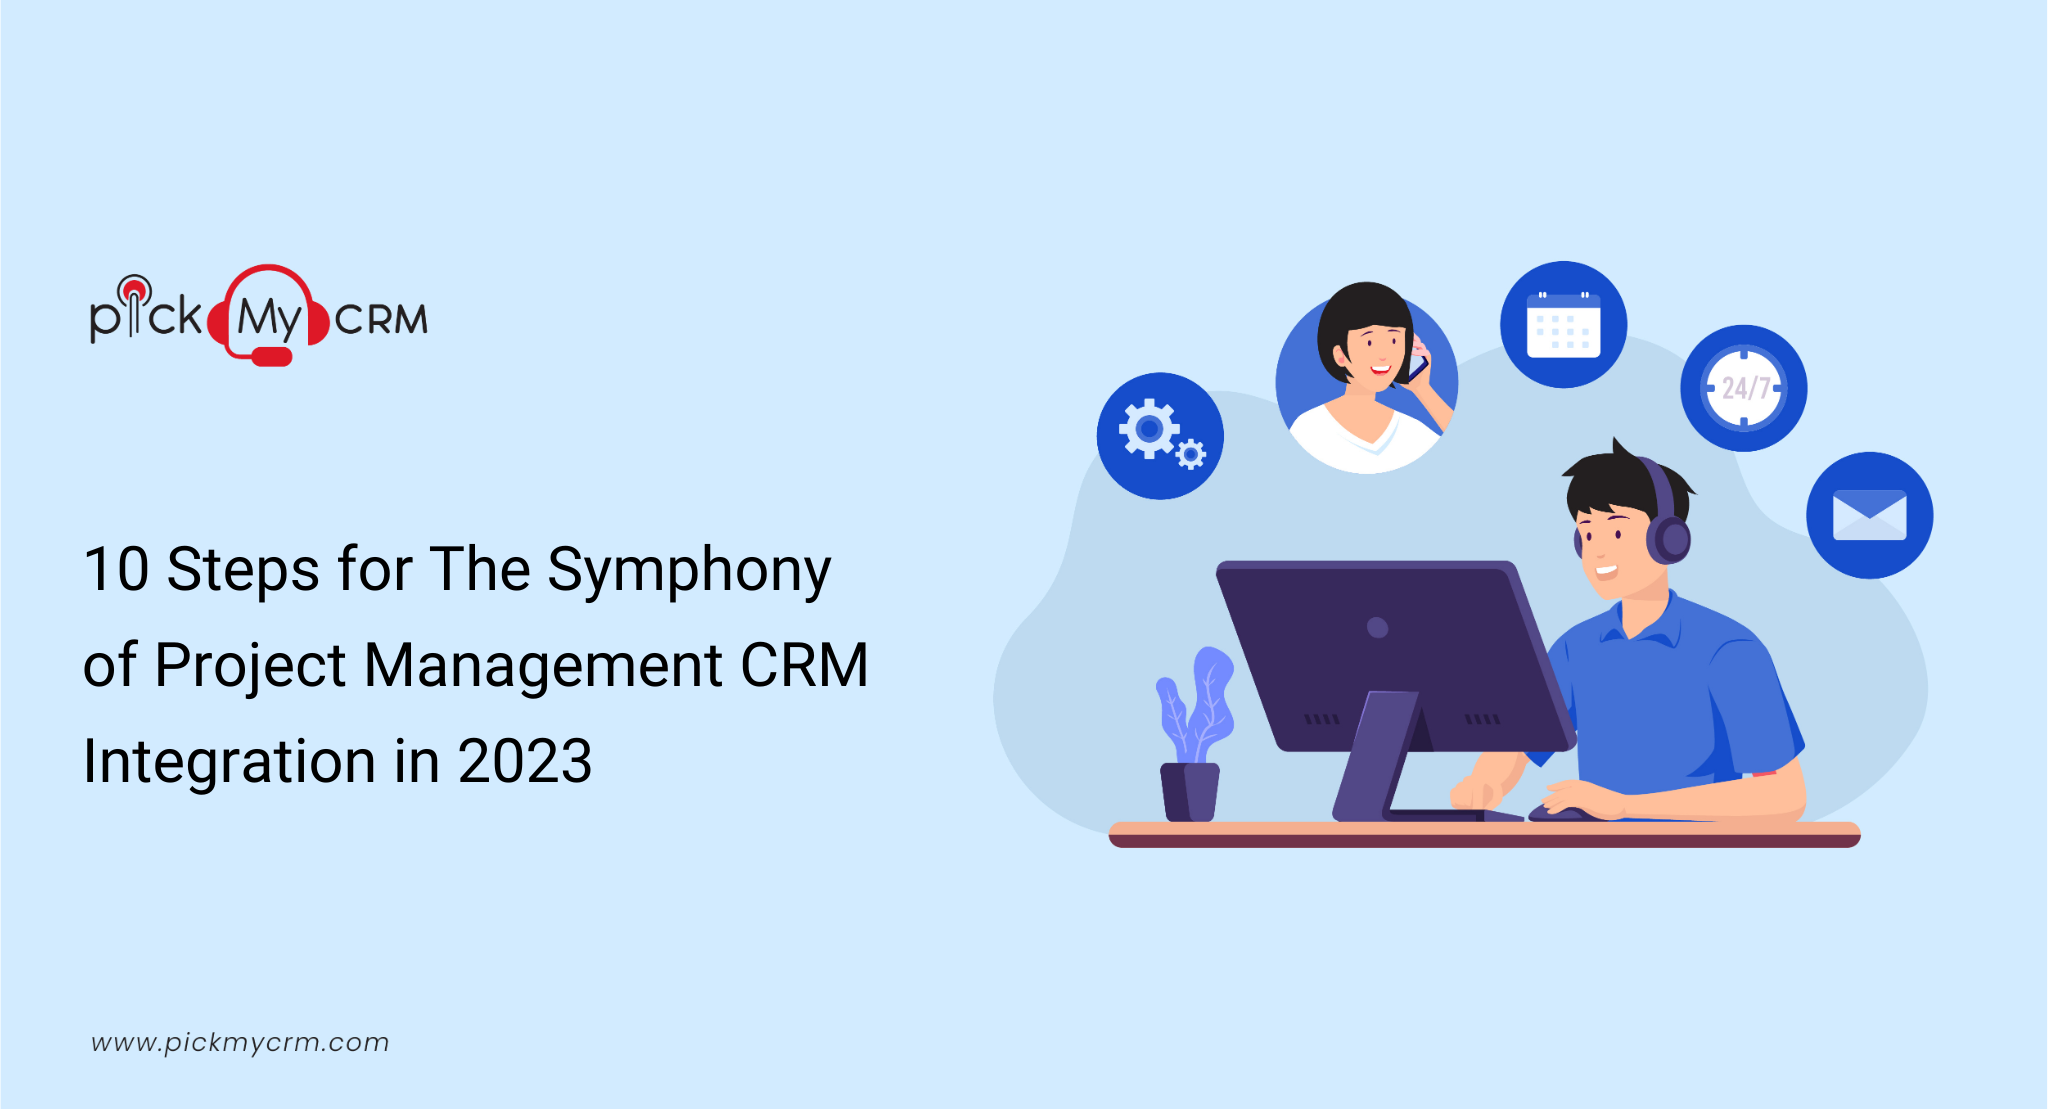 10 Steps for The Symphony of Project Management CRM Integration in 2023